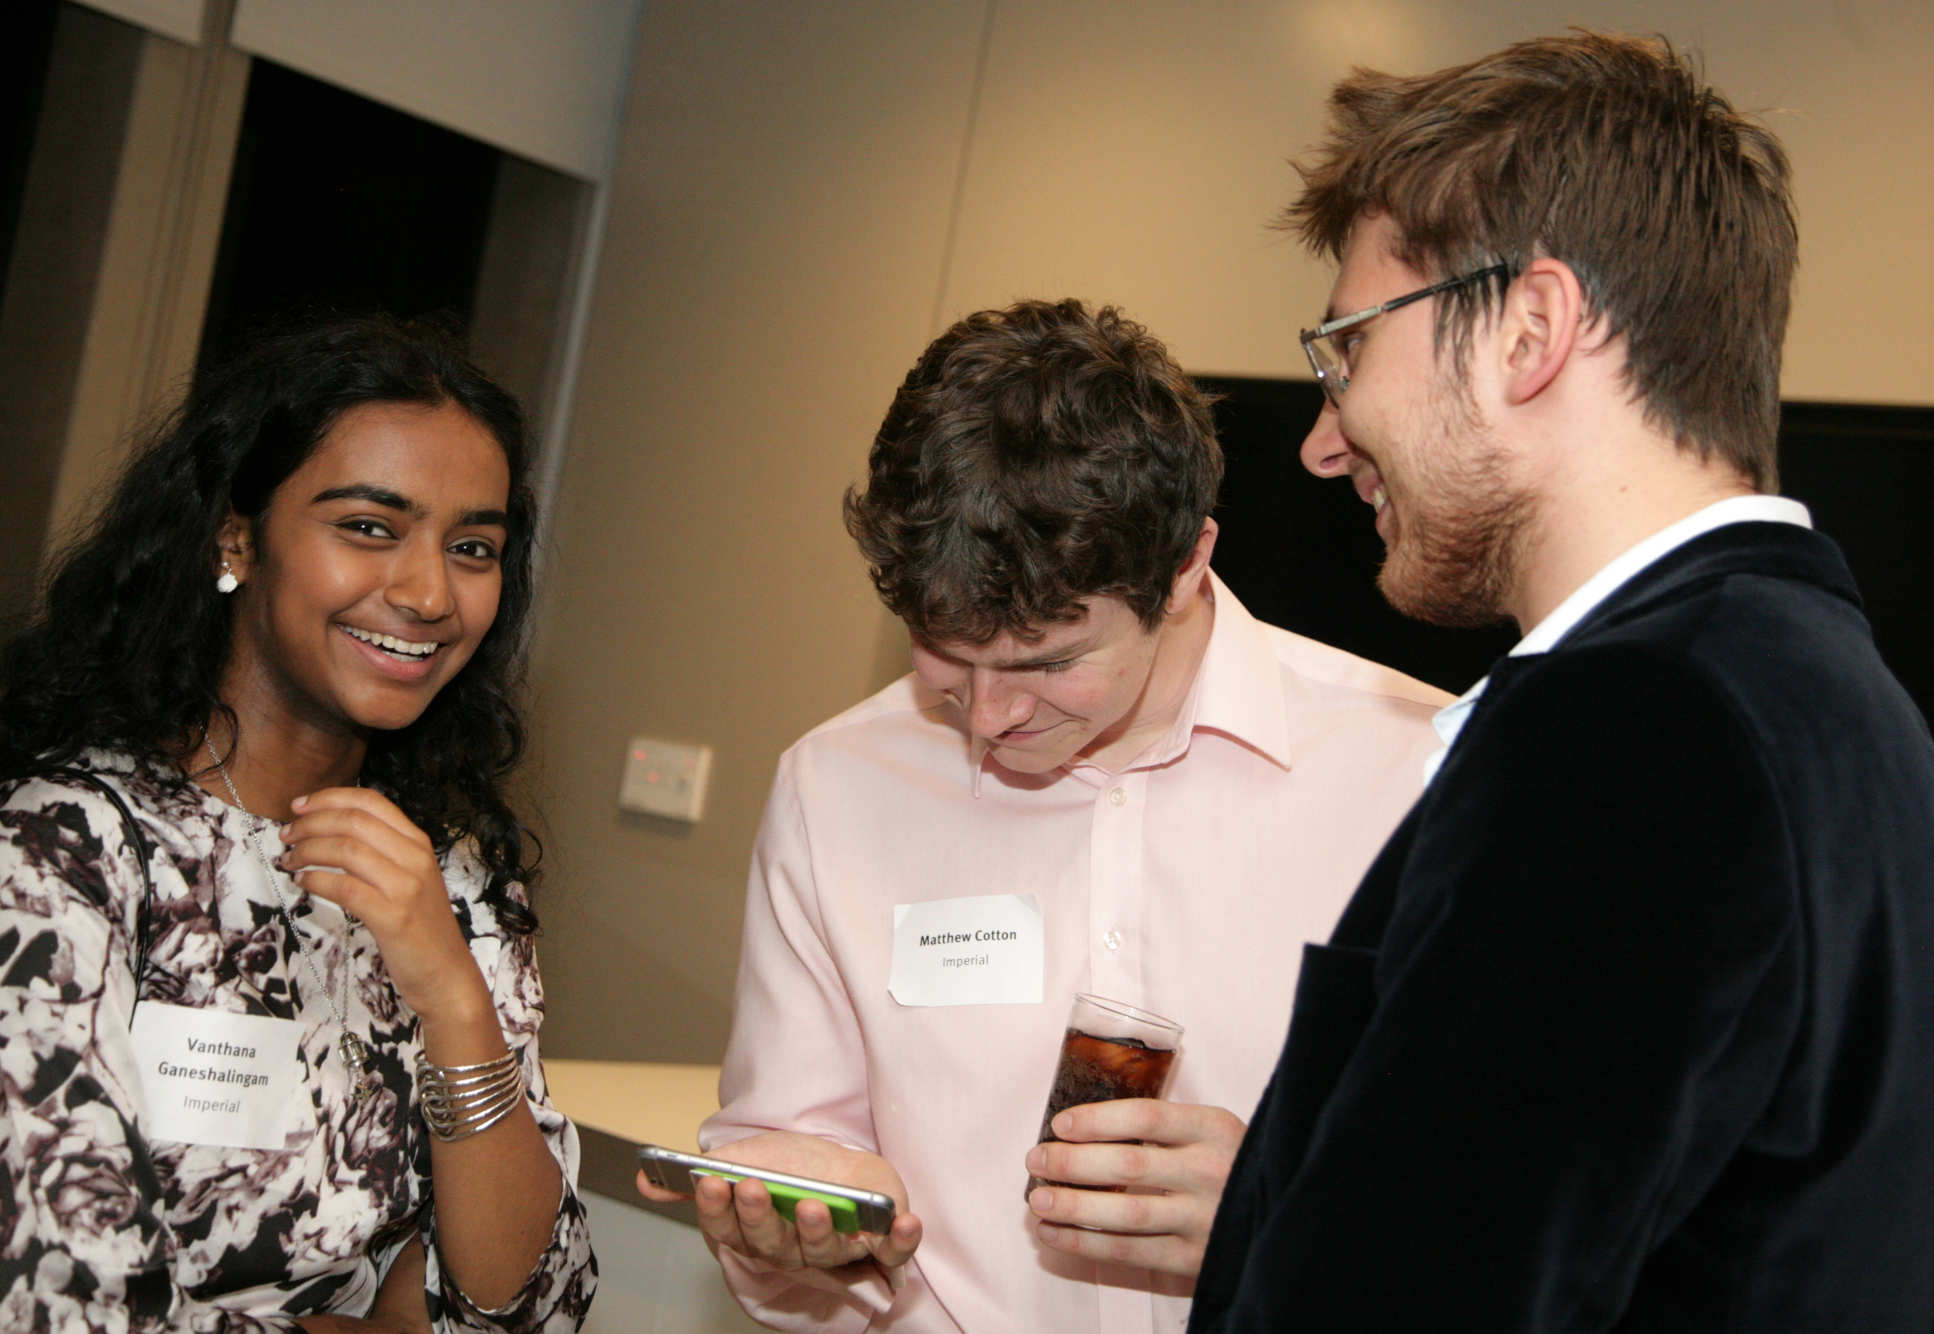 Students from Imperial and MIT met to exchange stories and experiences